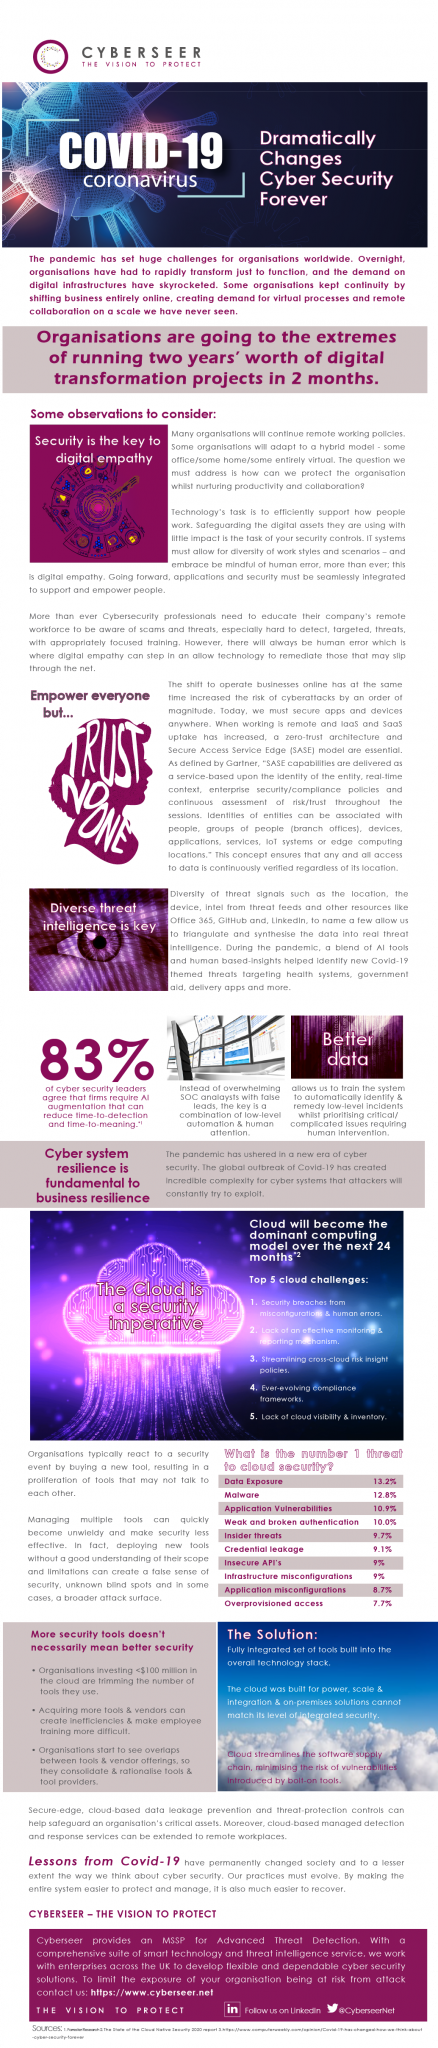 Cyberseer Infographic - Covid 19 Dramatically Changes Cyber Security Forever